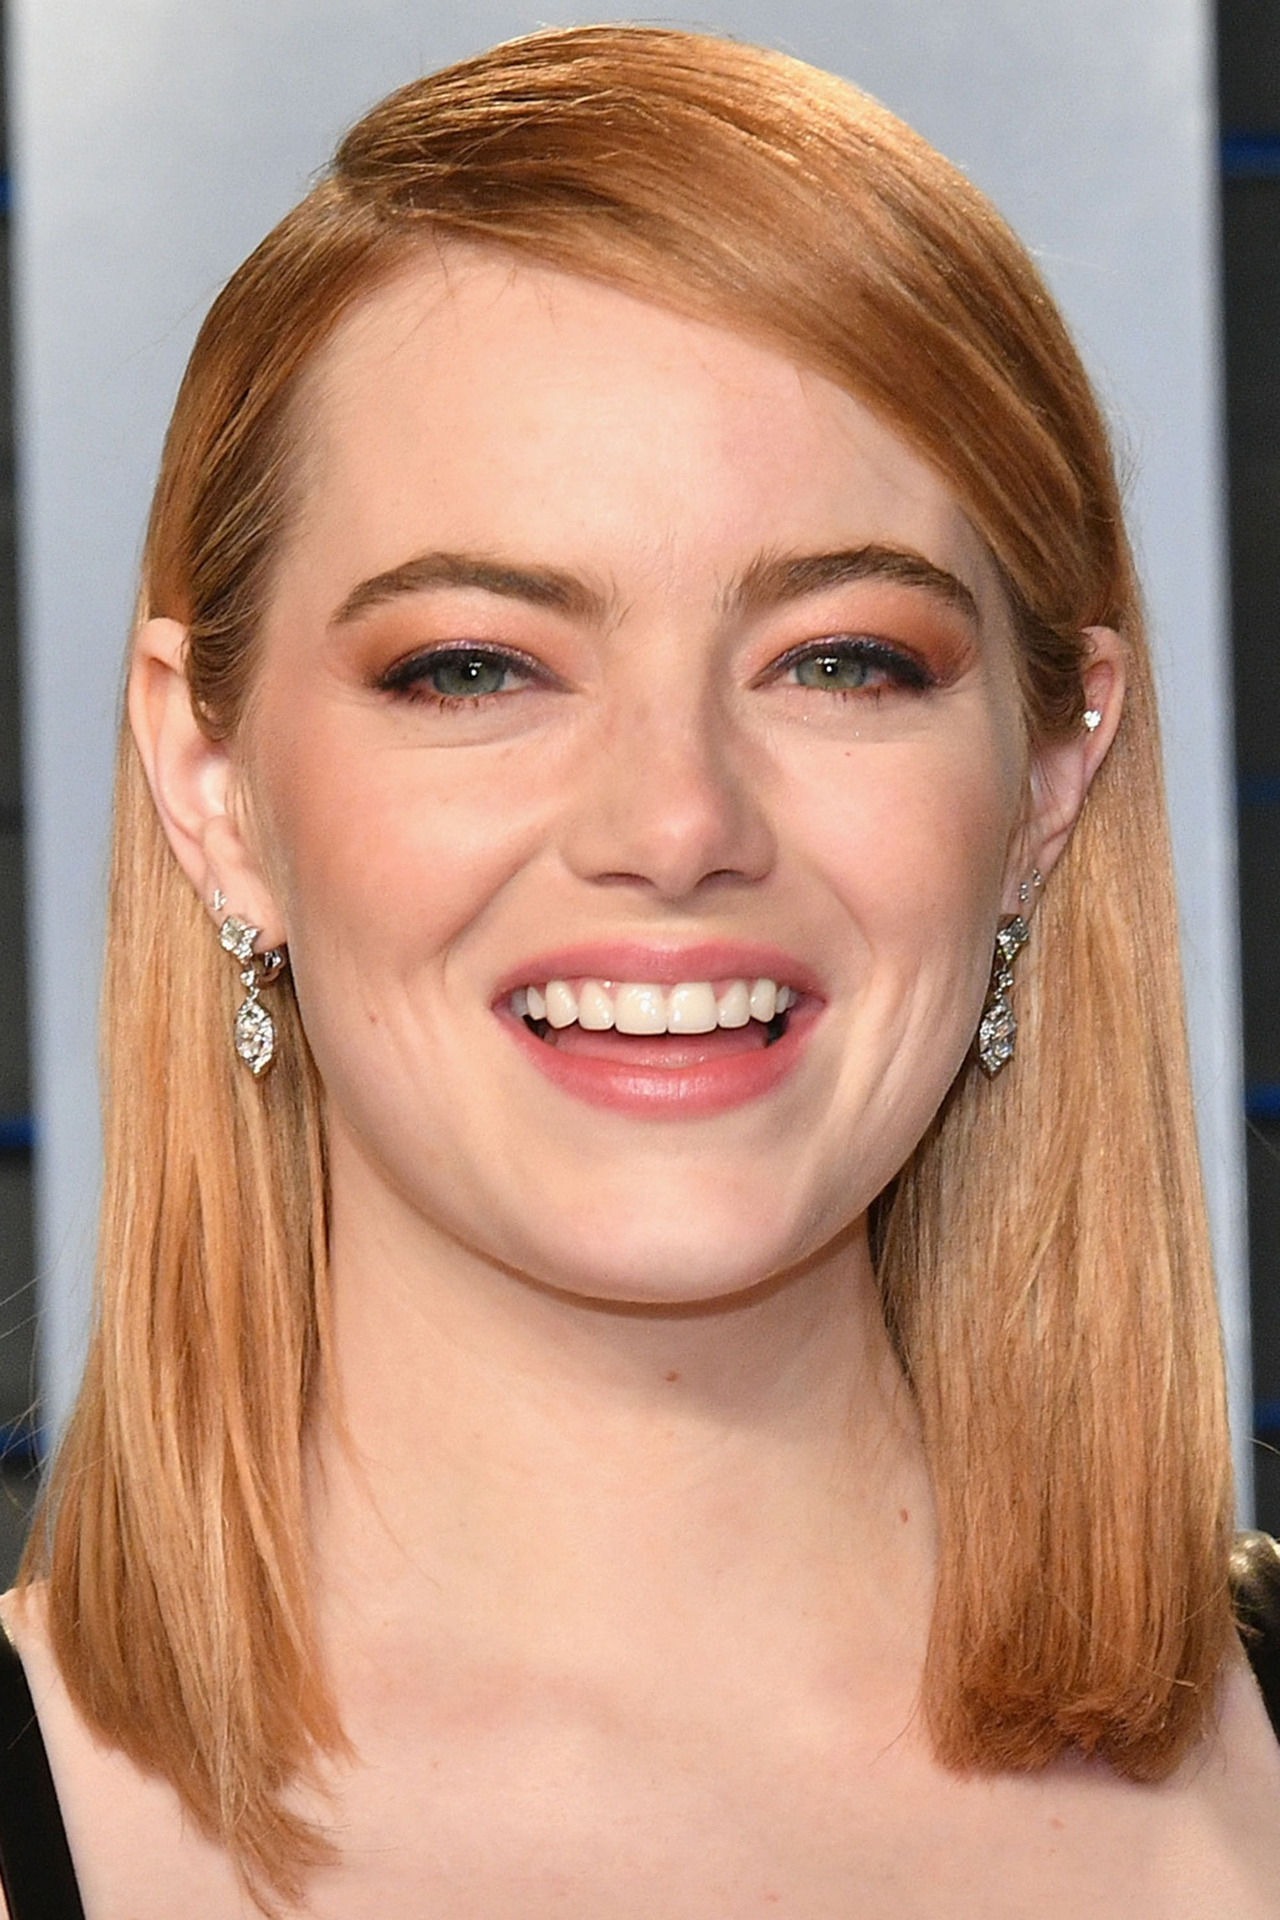 Emma Stone, before and after. - Beautyeditor